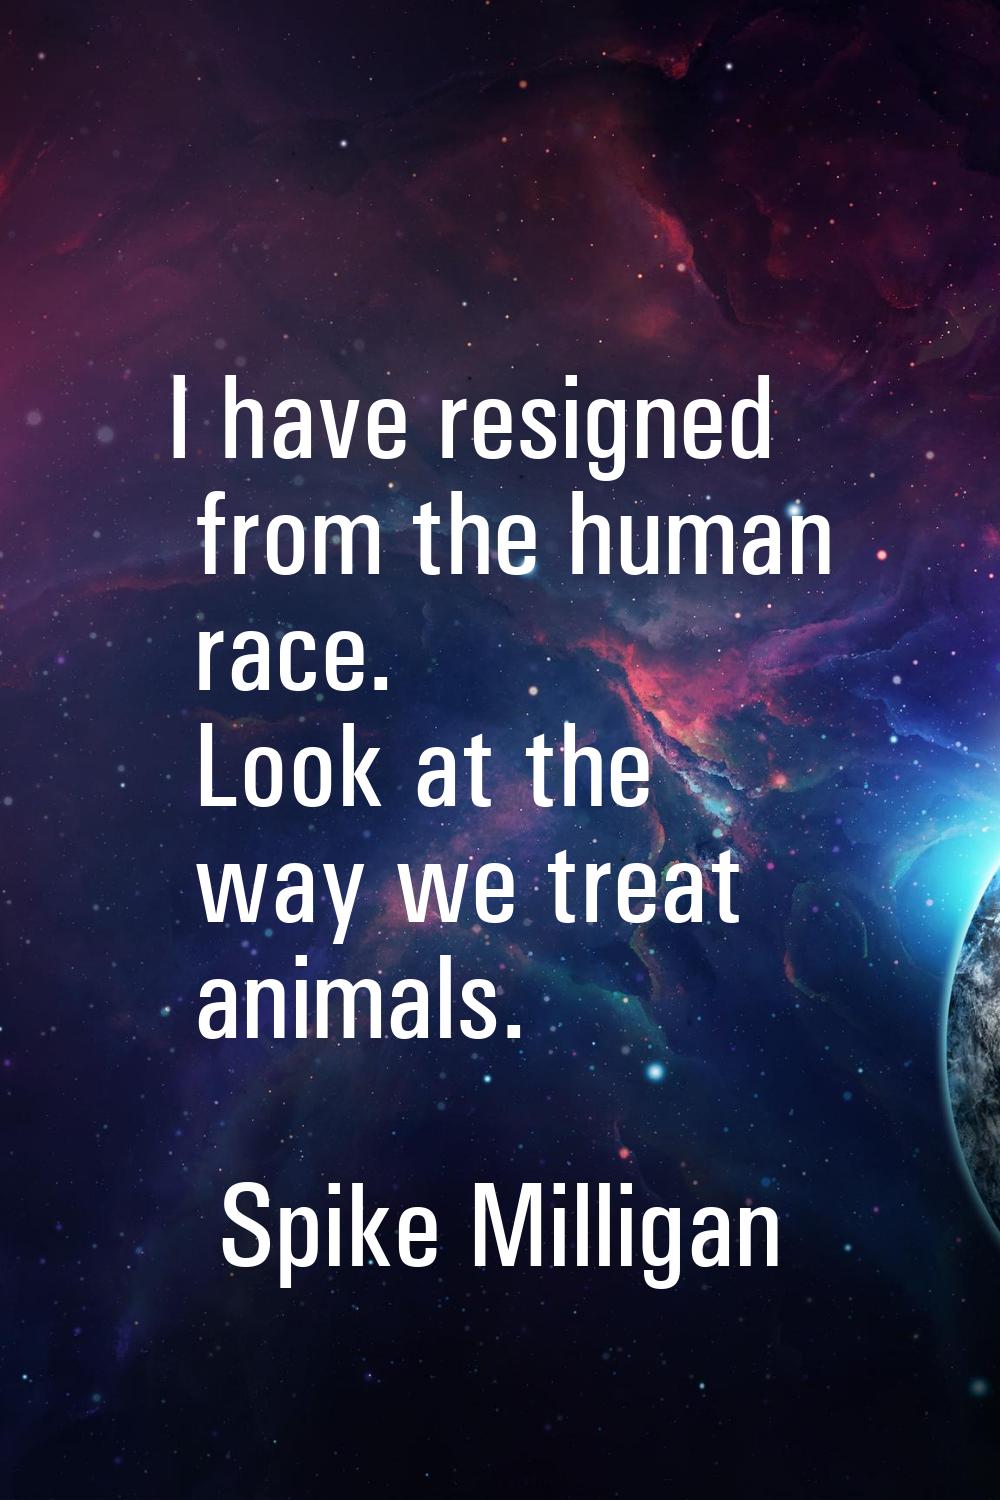 I have resigned from the human race. Look at the way we treat animals.